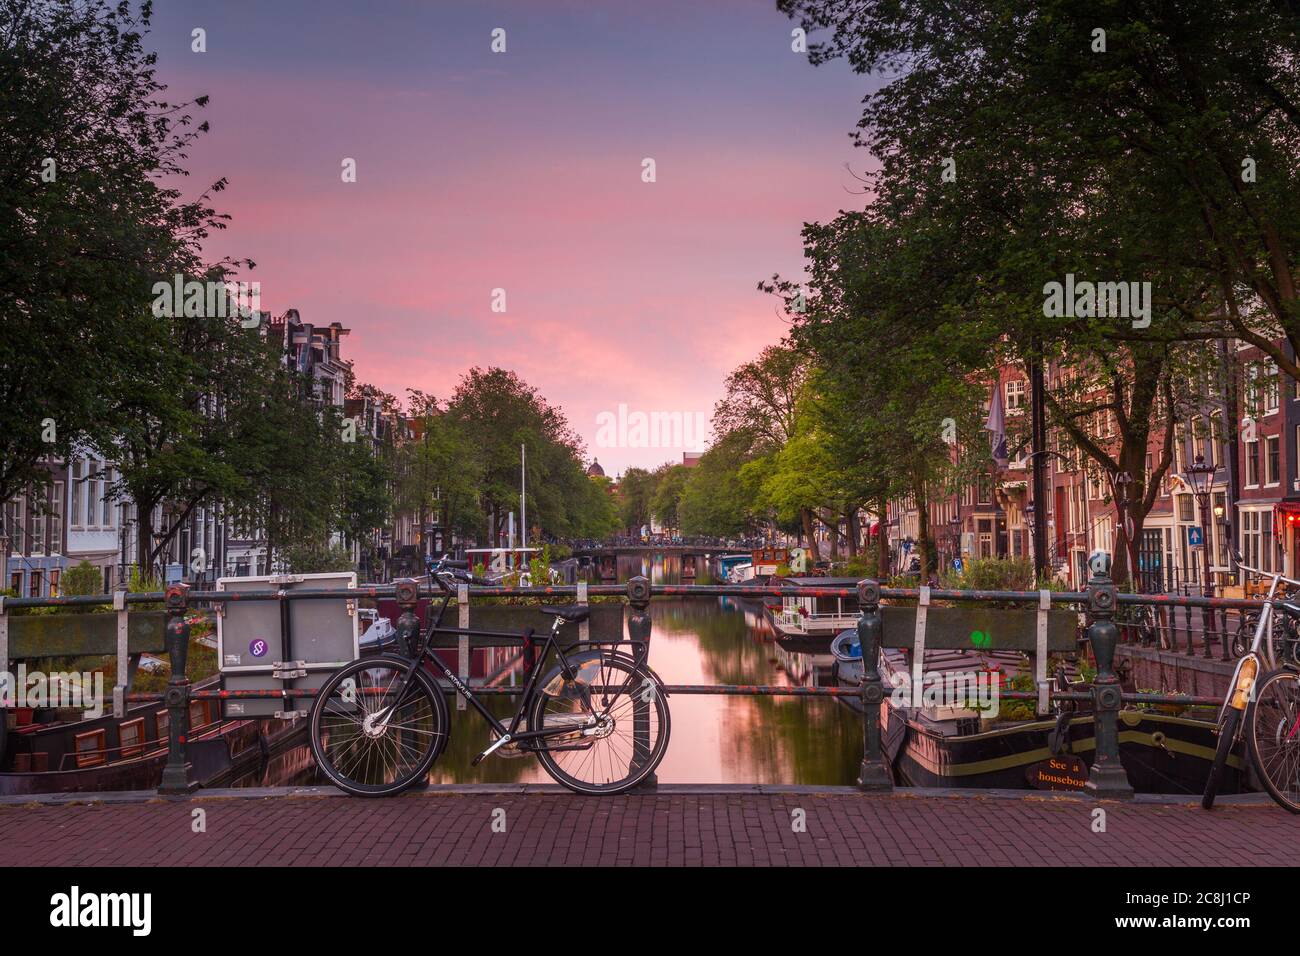 Dusk over a canal in Amsterdam Stock Photo